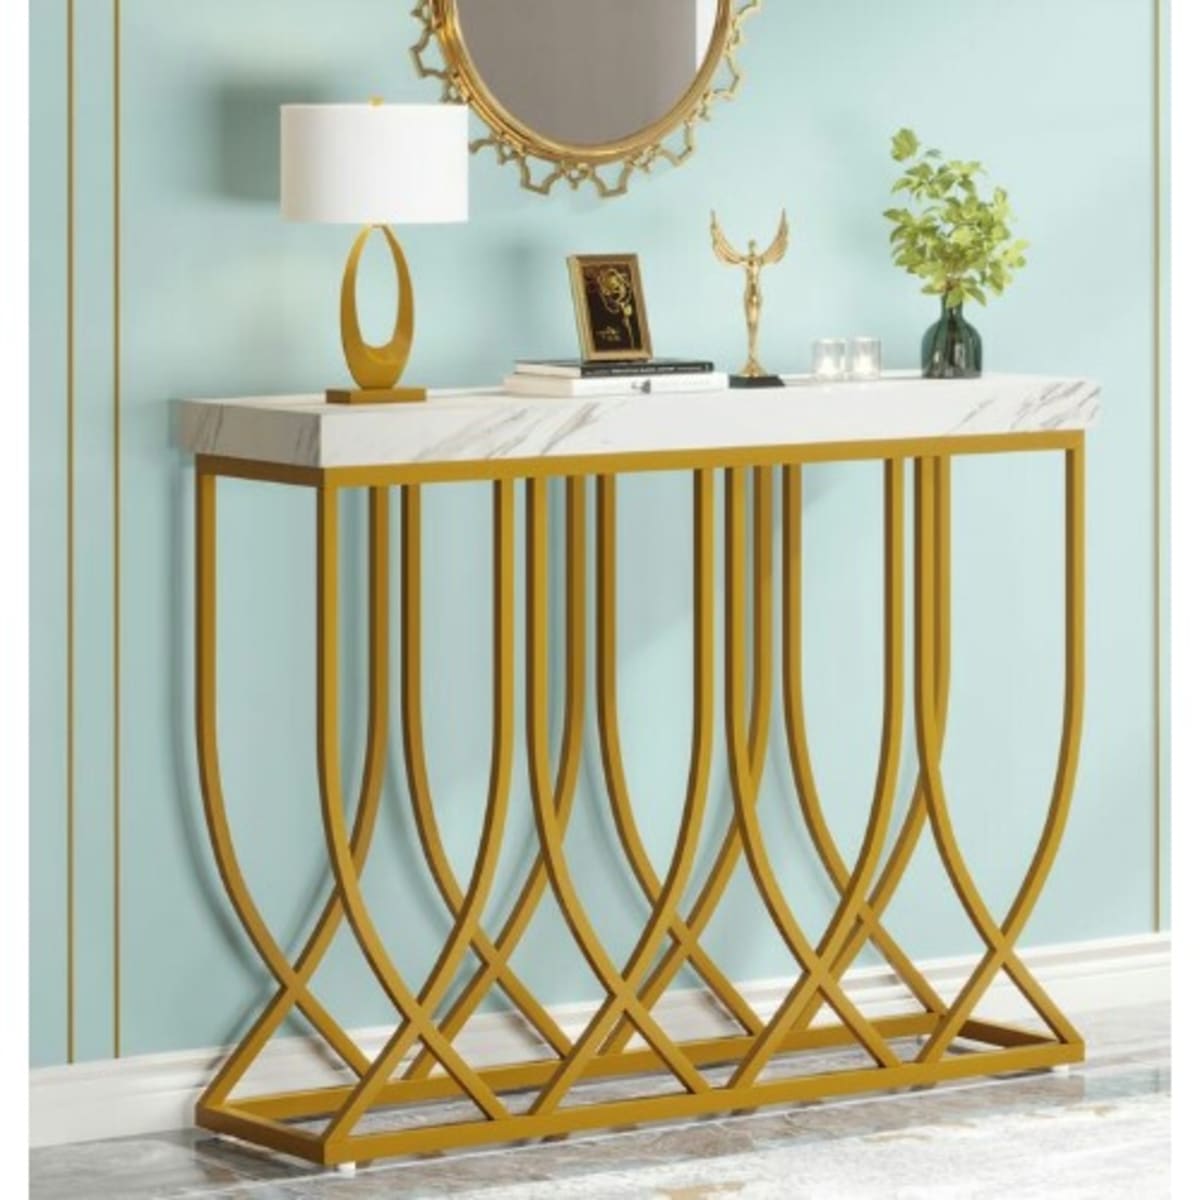 Swisse Accent Console Table Konga